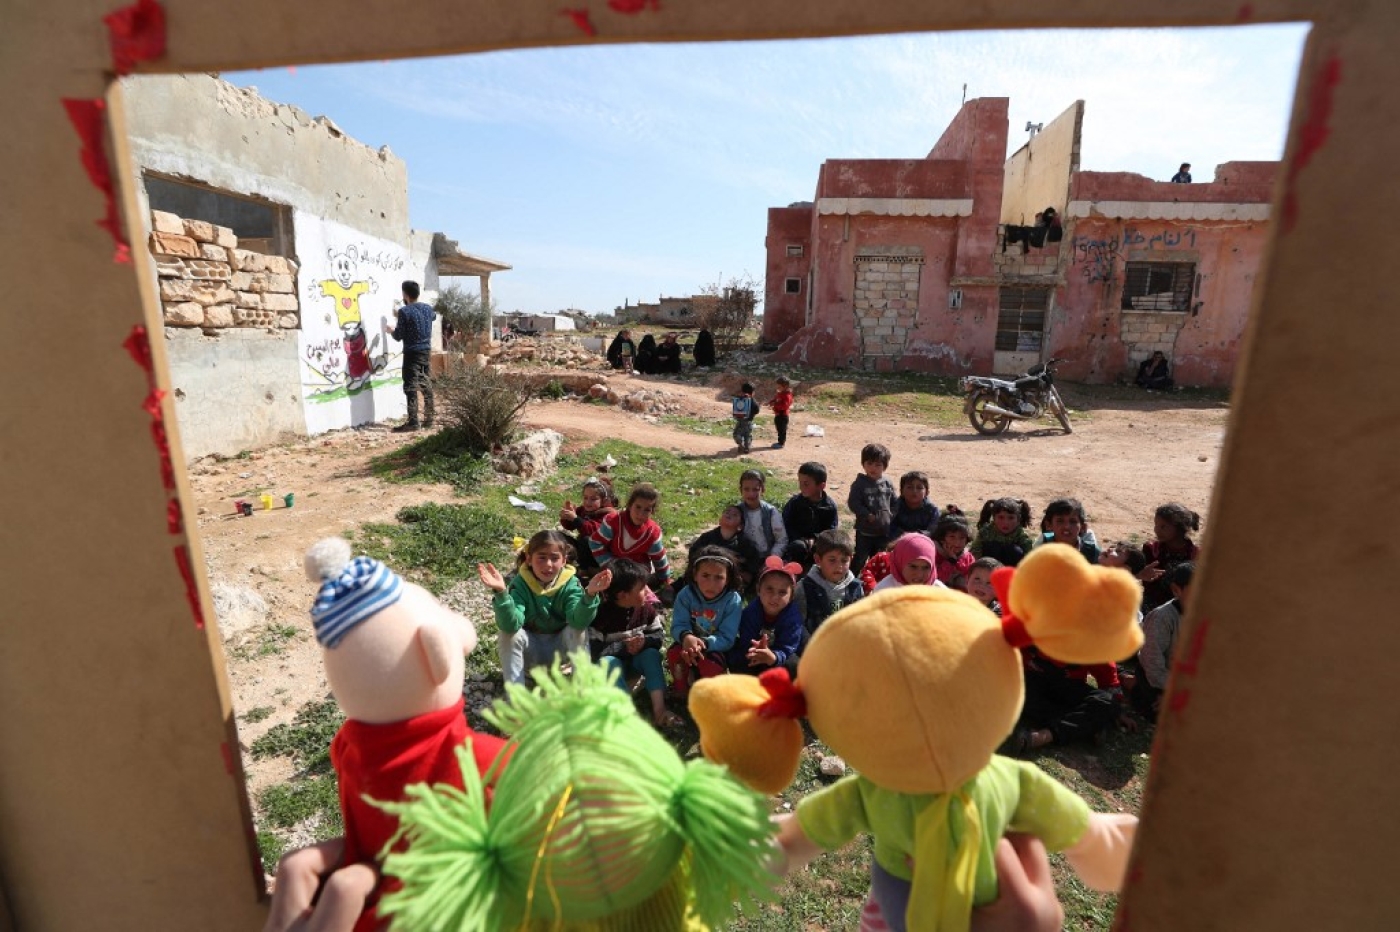 Syrian children watch a puppet show amid the ruins of buildings destroyed during Syria's civil war in the northwestern Idlib province on 30 March 2021.